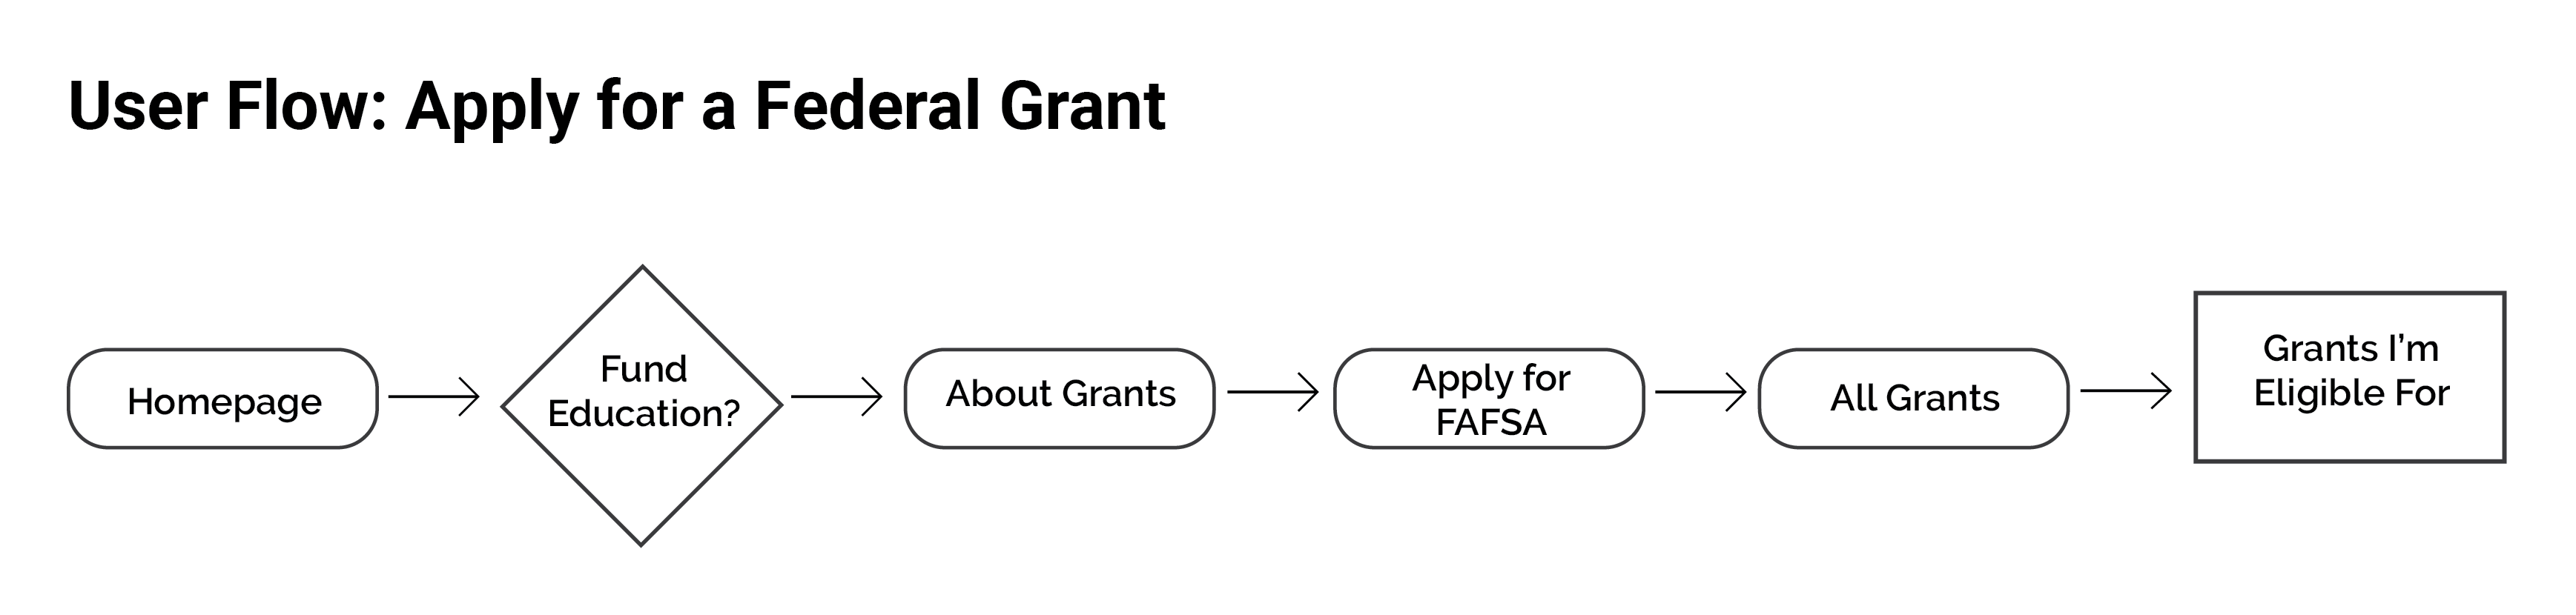 User Flow: Applying for a Federal Grant.